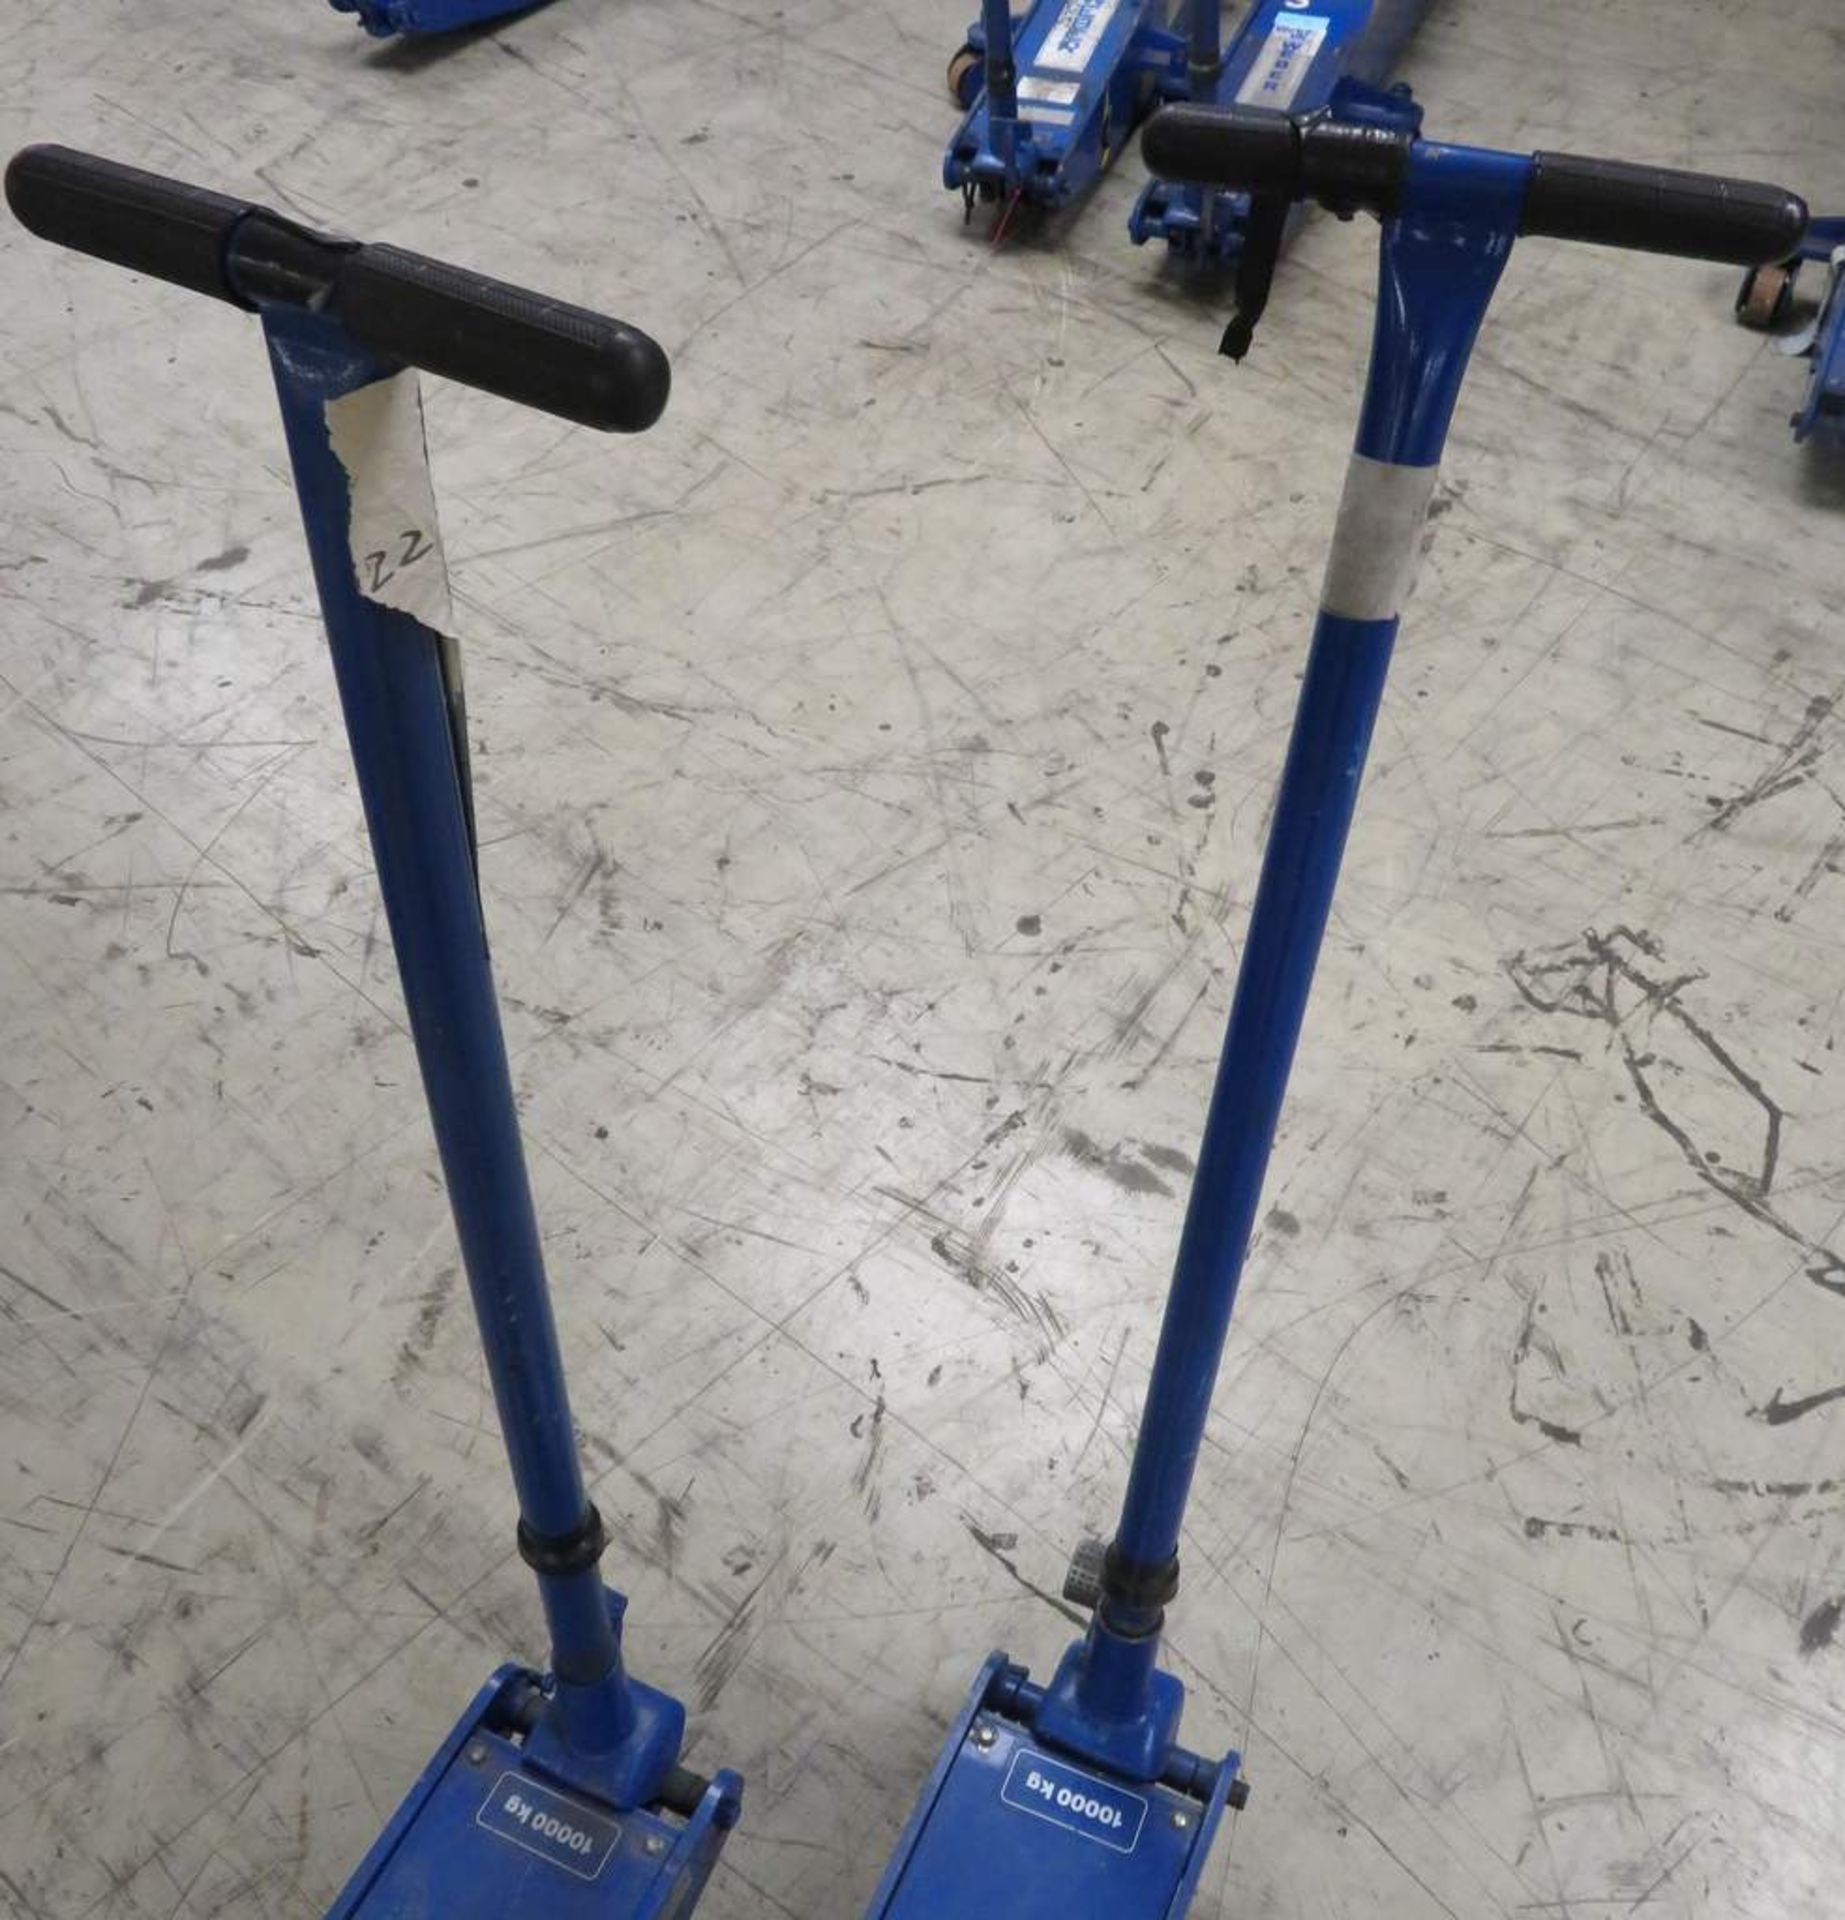 2x Weber 10 Tonne Vehicle Trolley Jacks Complete With Handle - WDK100LQ - Working Condition - Image 8 of 9